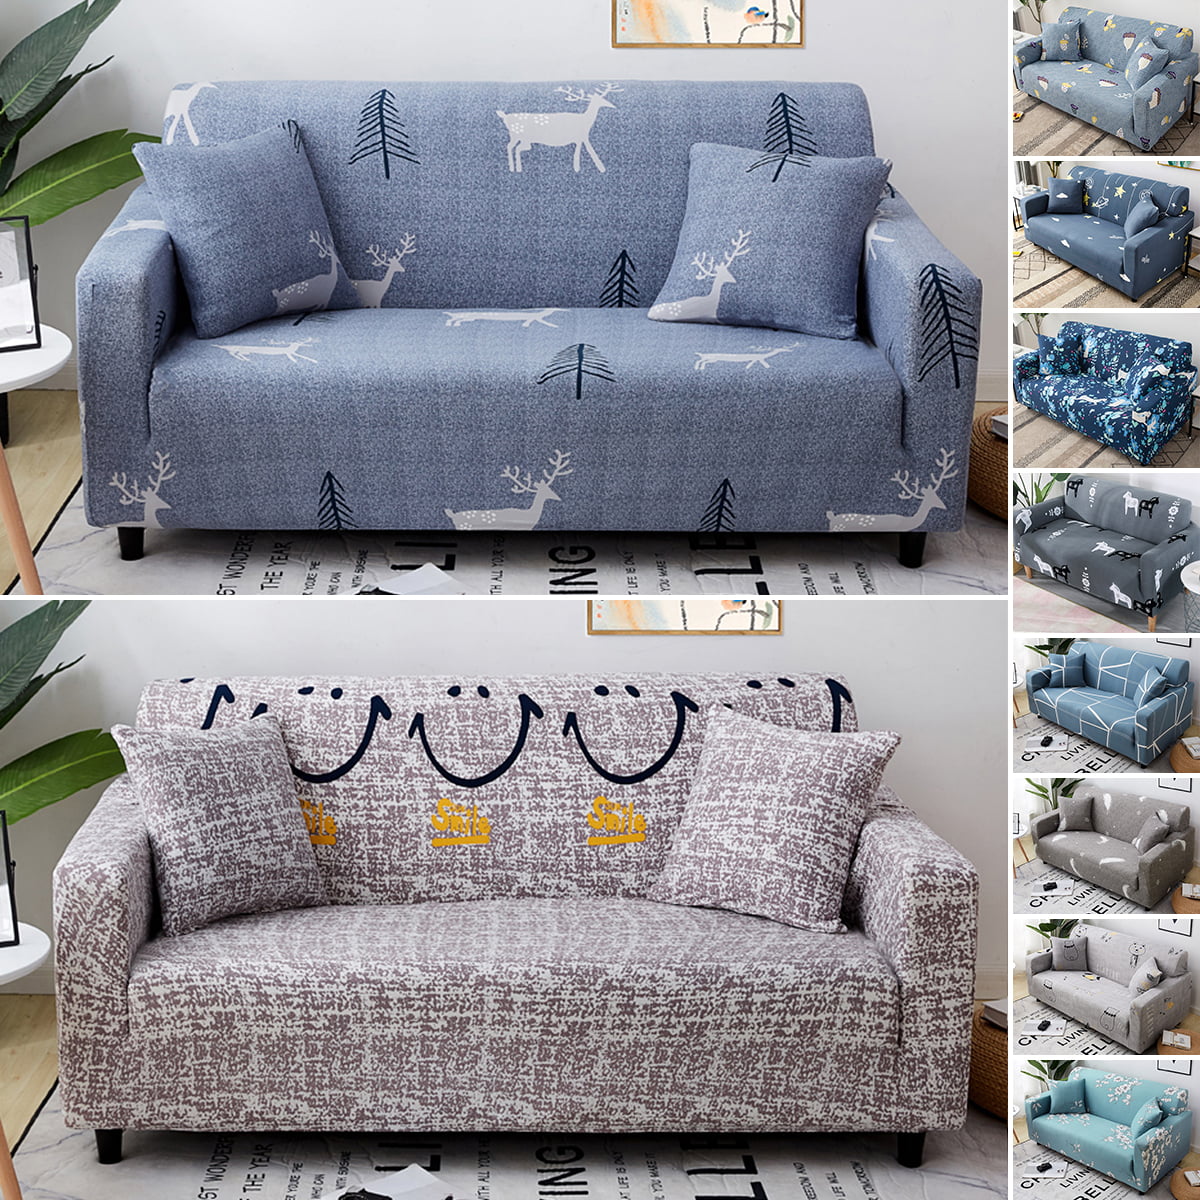 2 JACQUARD SOFA COVER SETTEE COVER Available in 1 3 Seater Sofa Covers 